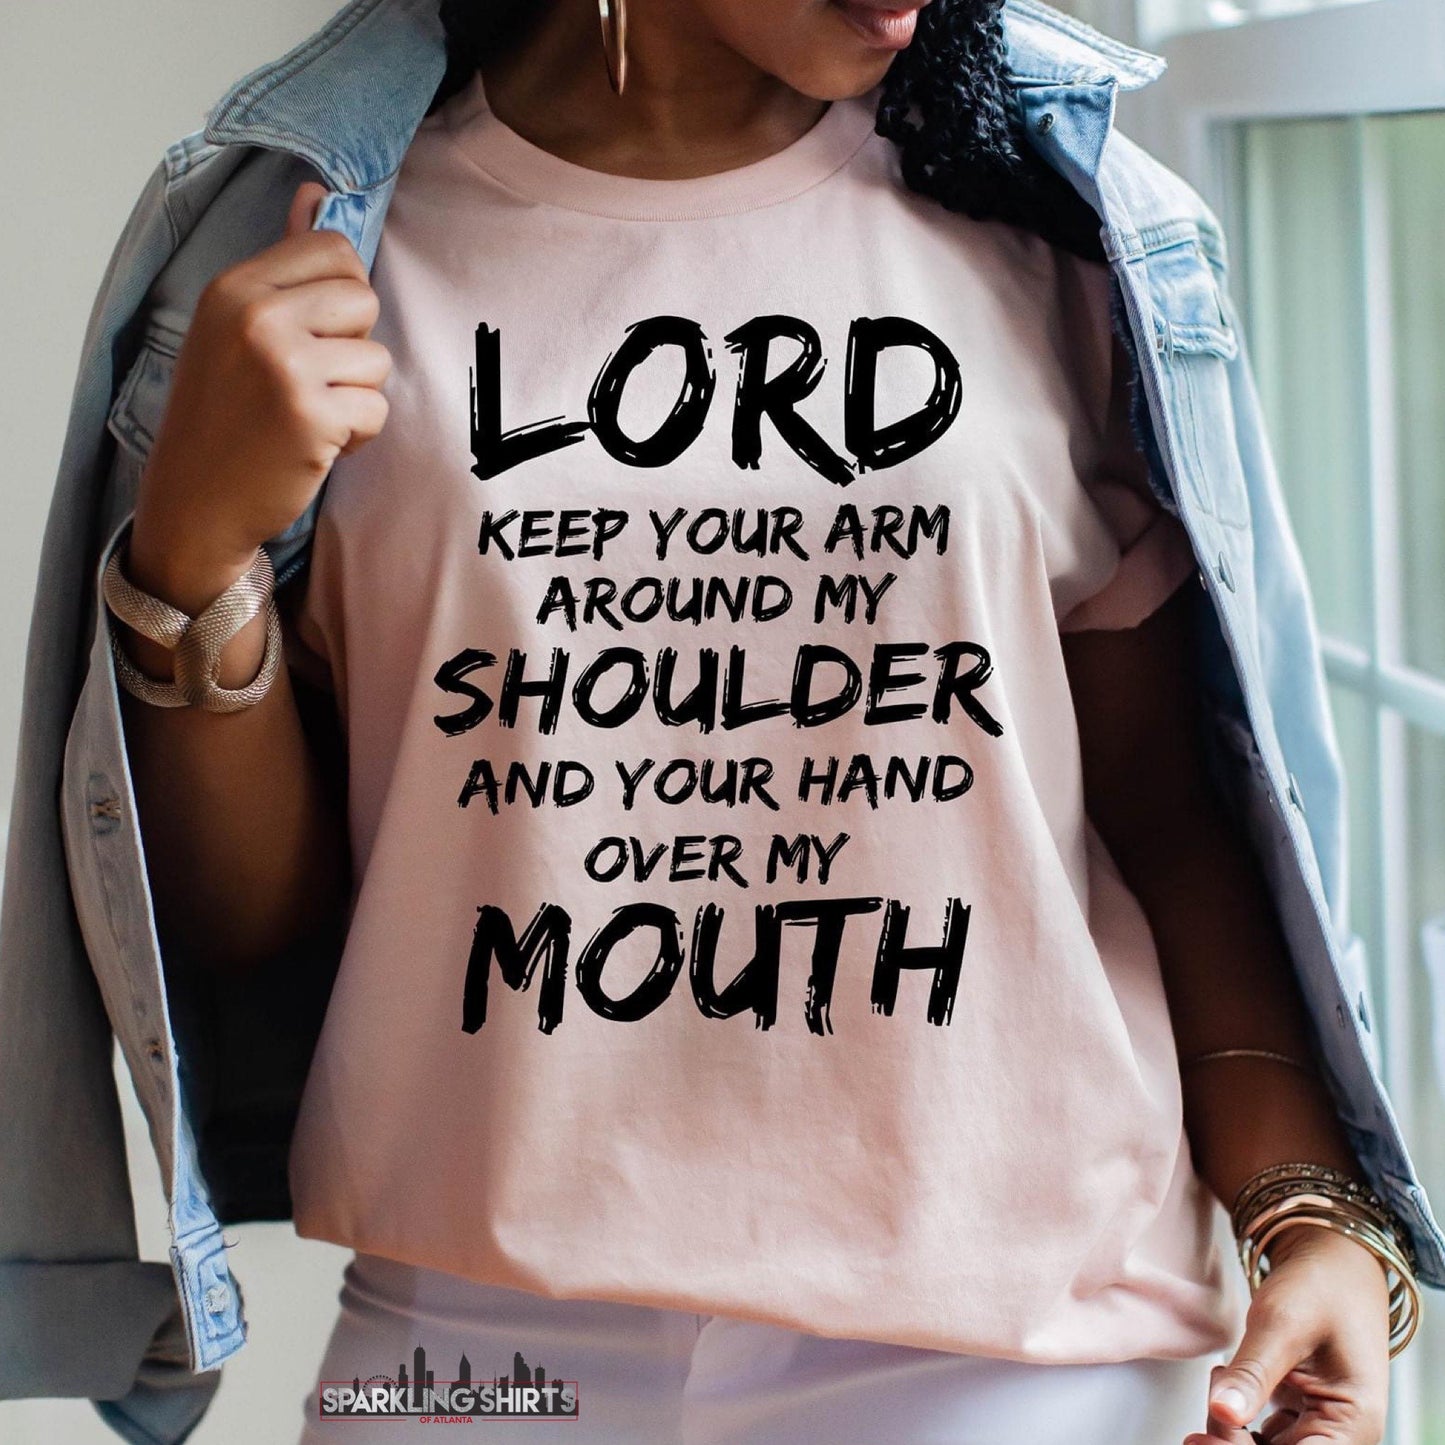 Lord Keep Your Arm Around My Shoulder and Your Hand Over My Mouth| Sarcasm | Sassy| Inspiration| Fun T-shirts| Graphic T-shirts